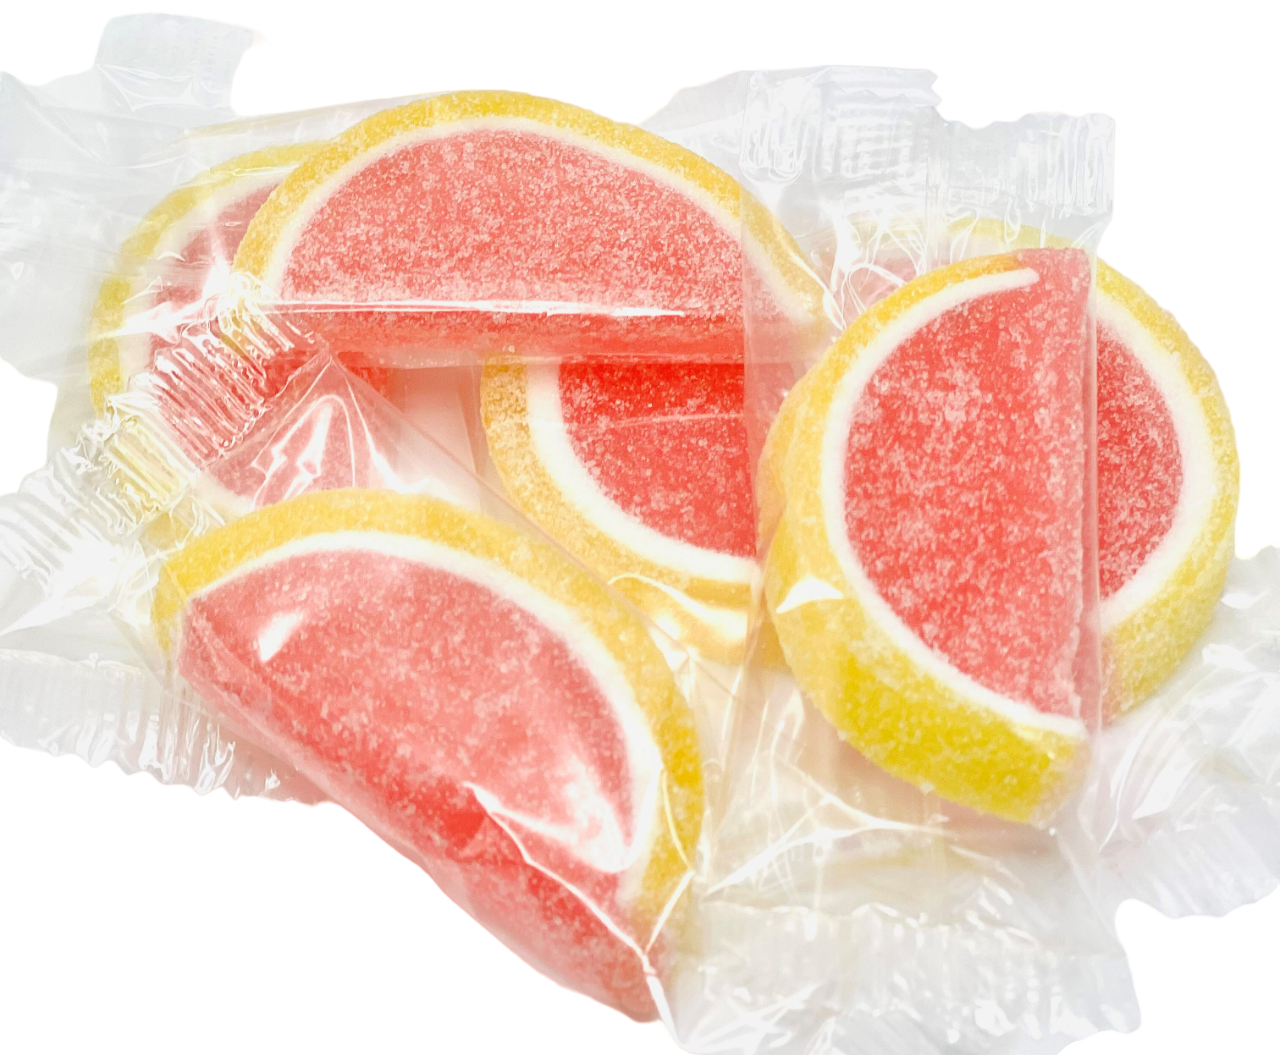  Boston Fruit Slices Round, 11-Ounce : Grocery & Gourmet Food